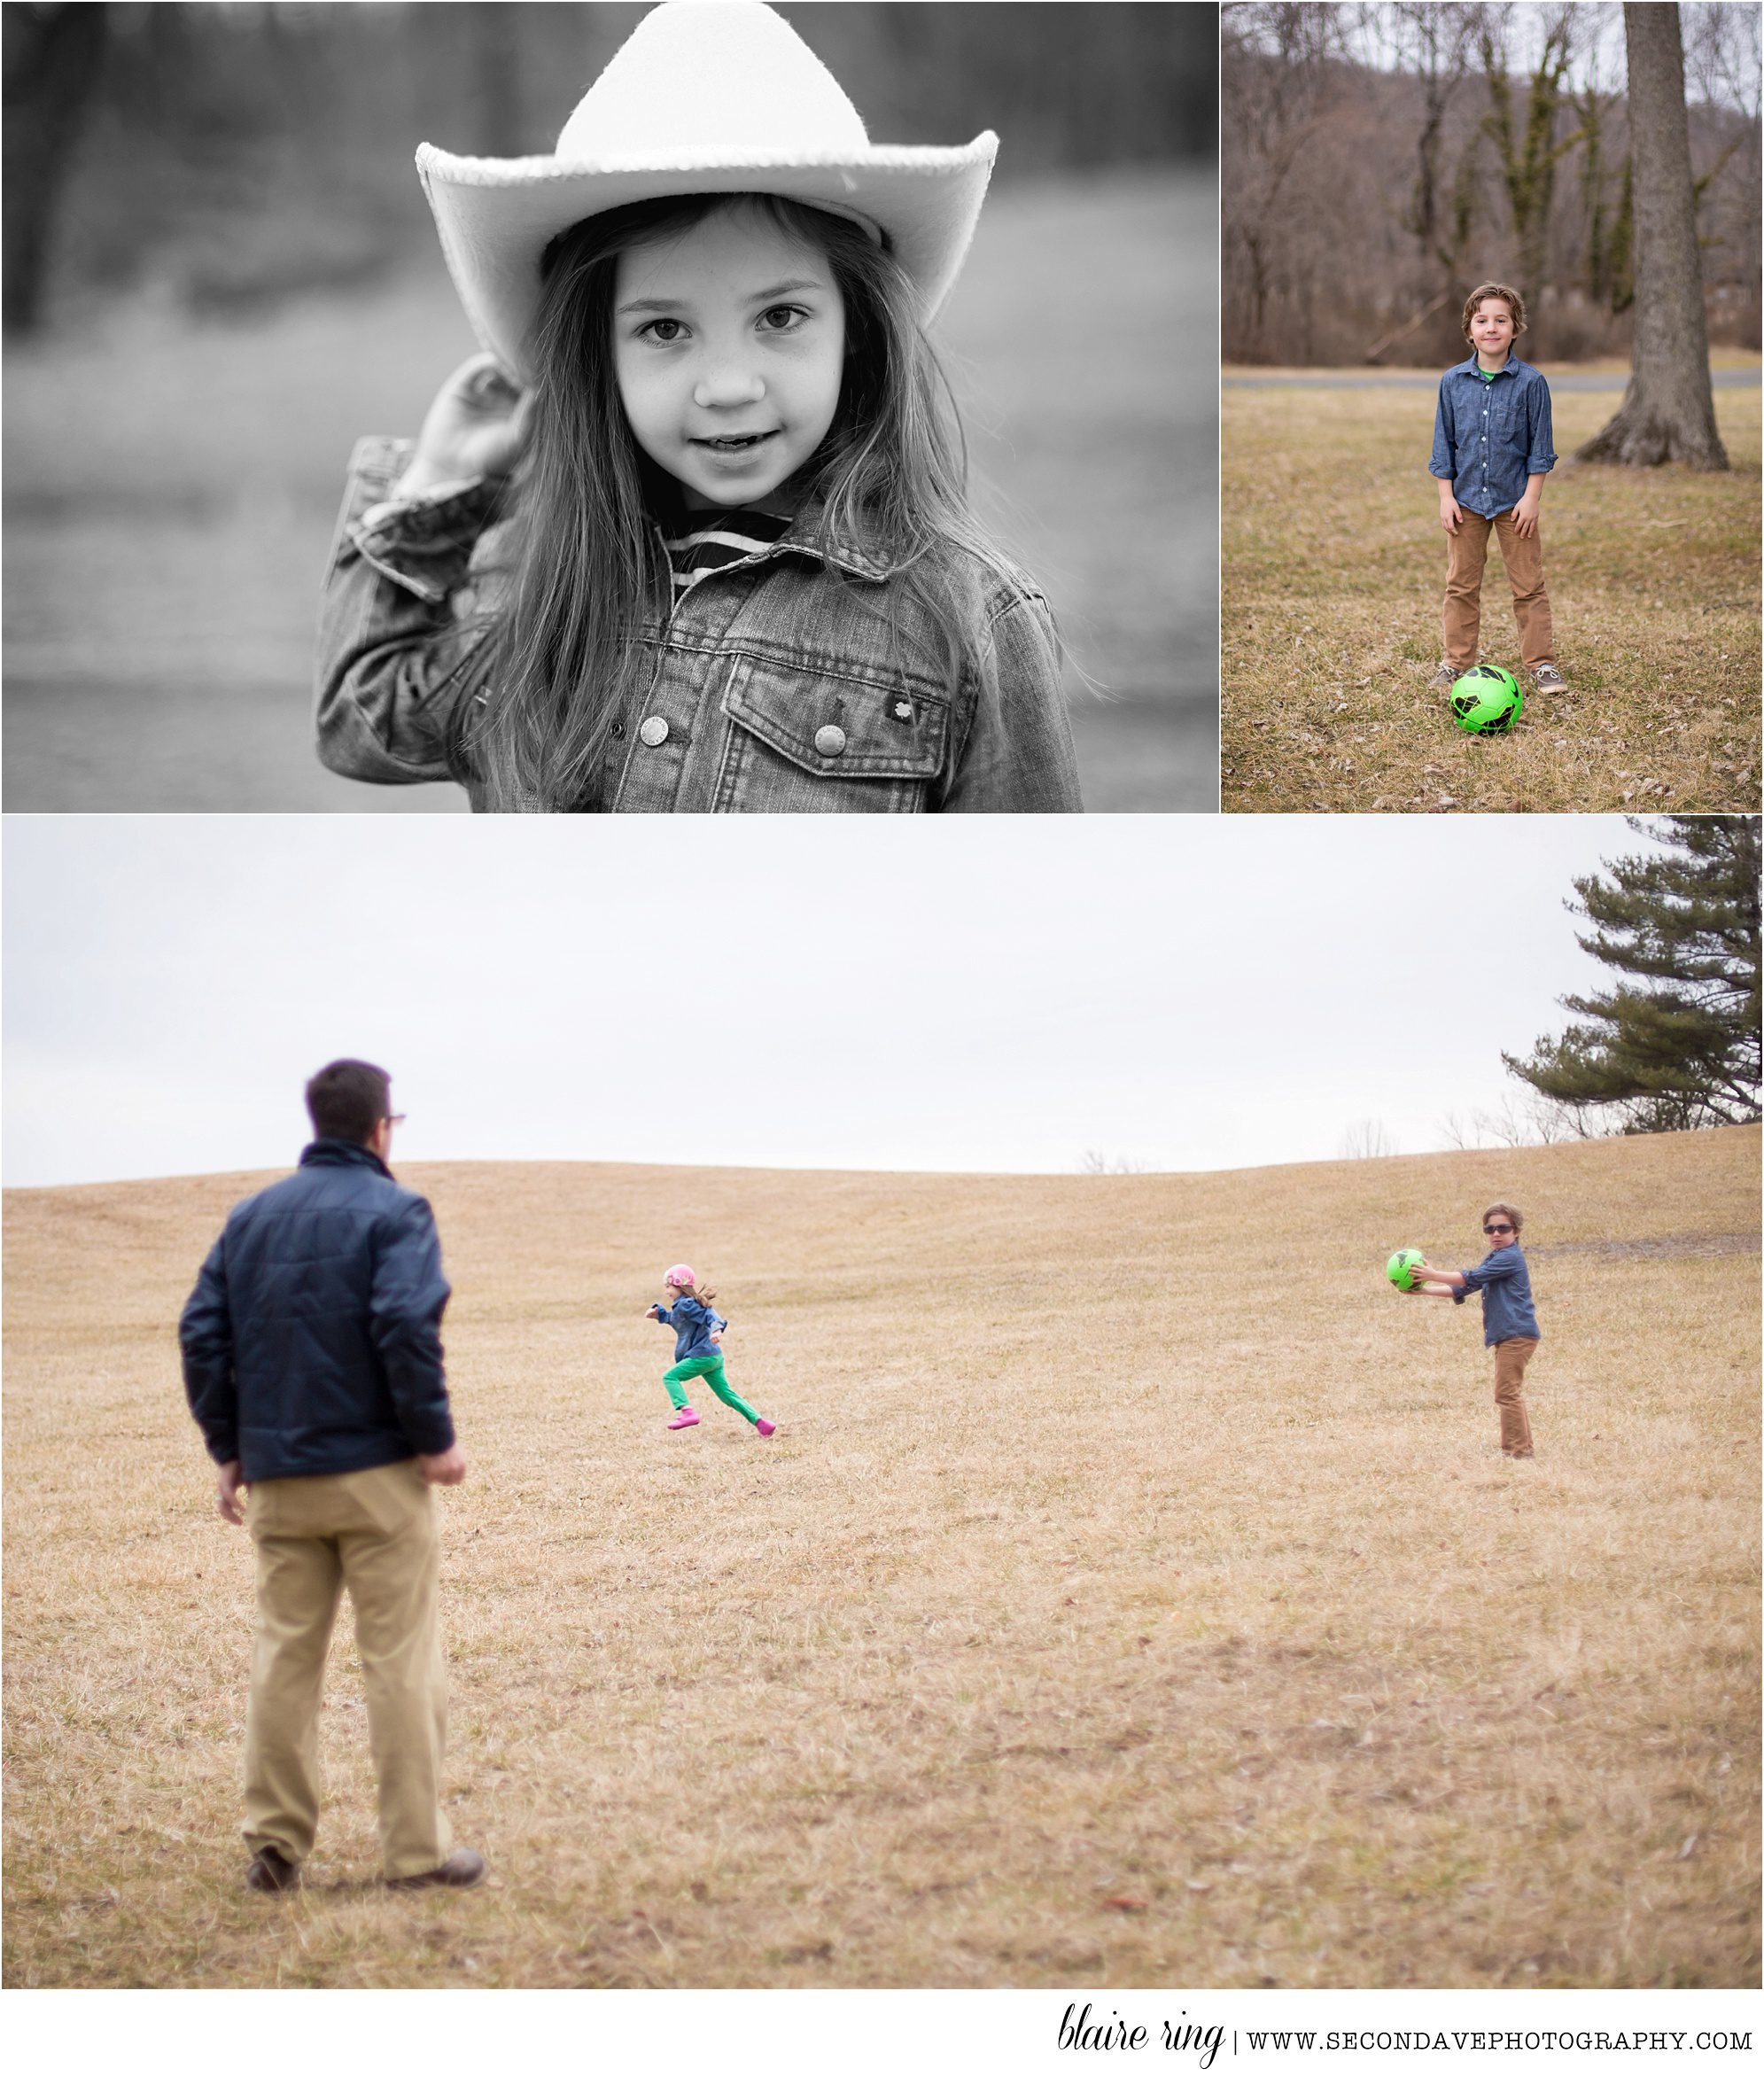 Lifestyle winter photo shoot with soccer fans by Leesburg VA family photographer! No poses - all organic and natural smiles and fun.